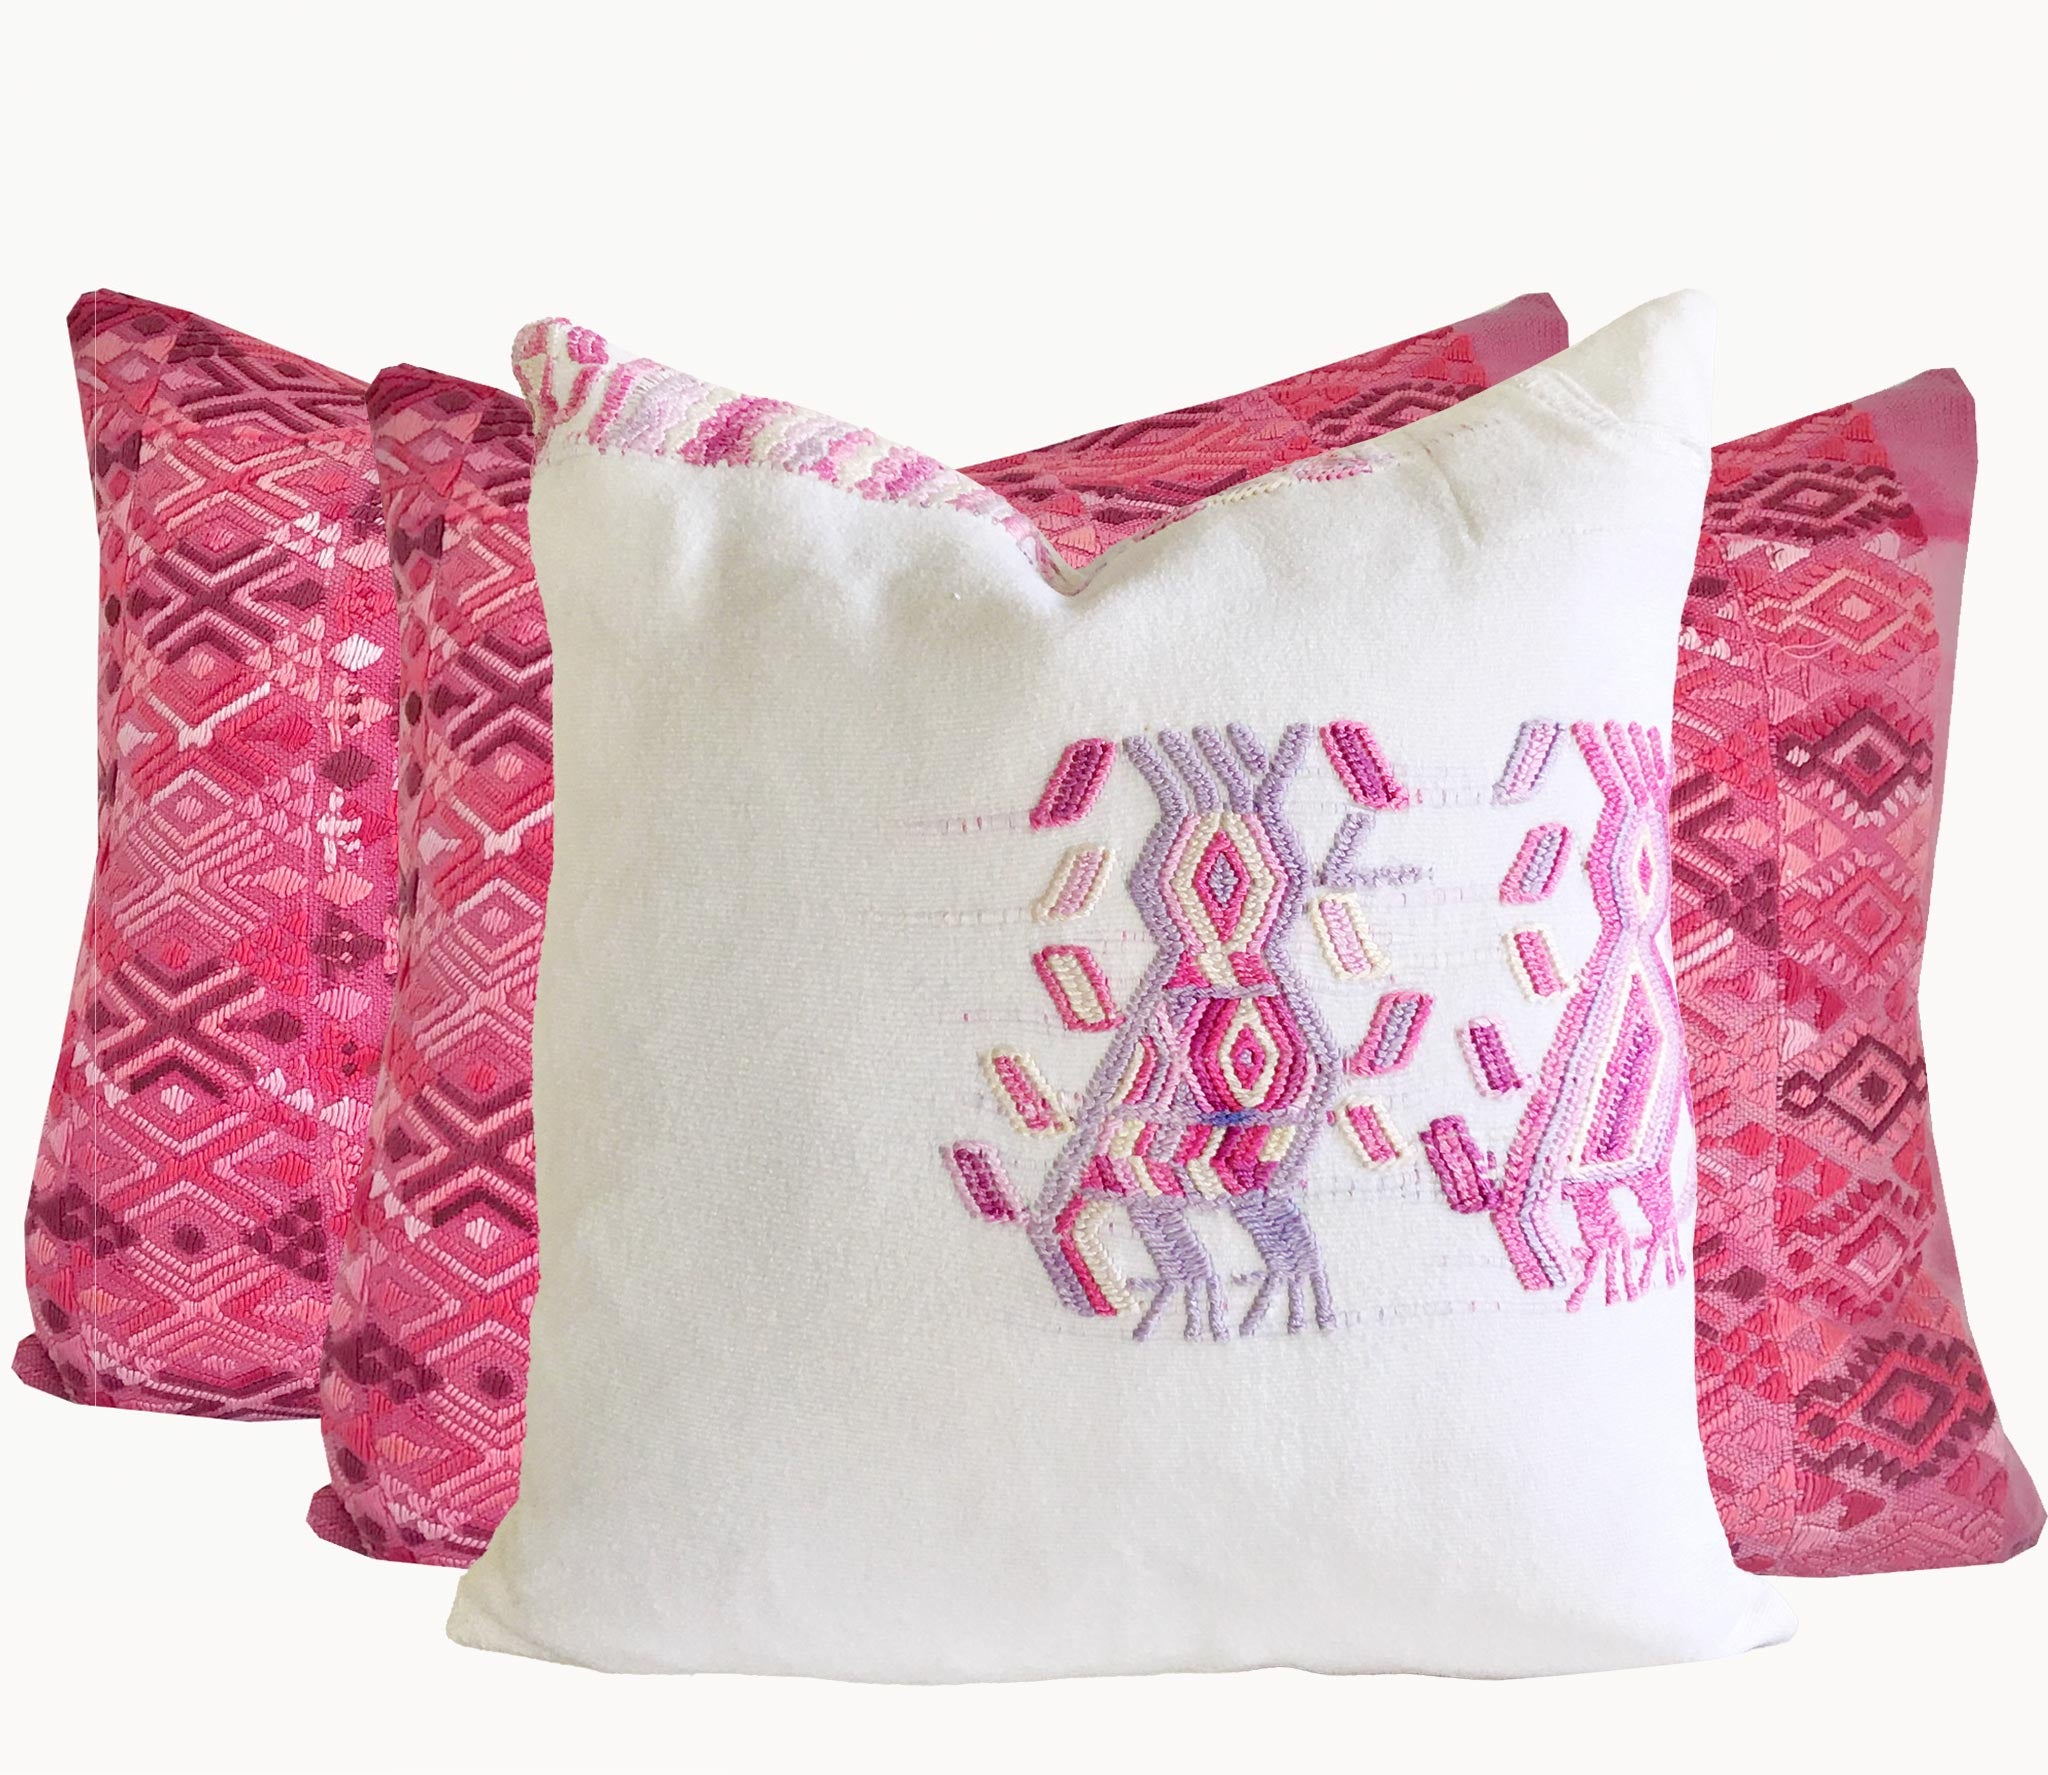 Set of 3 Guatemalan Huipil Pillows, vintage, hand embroidered textiles in hot pink and white with a playful tribal design